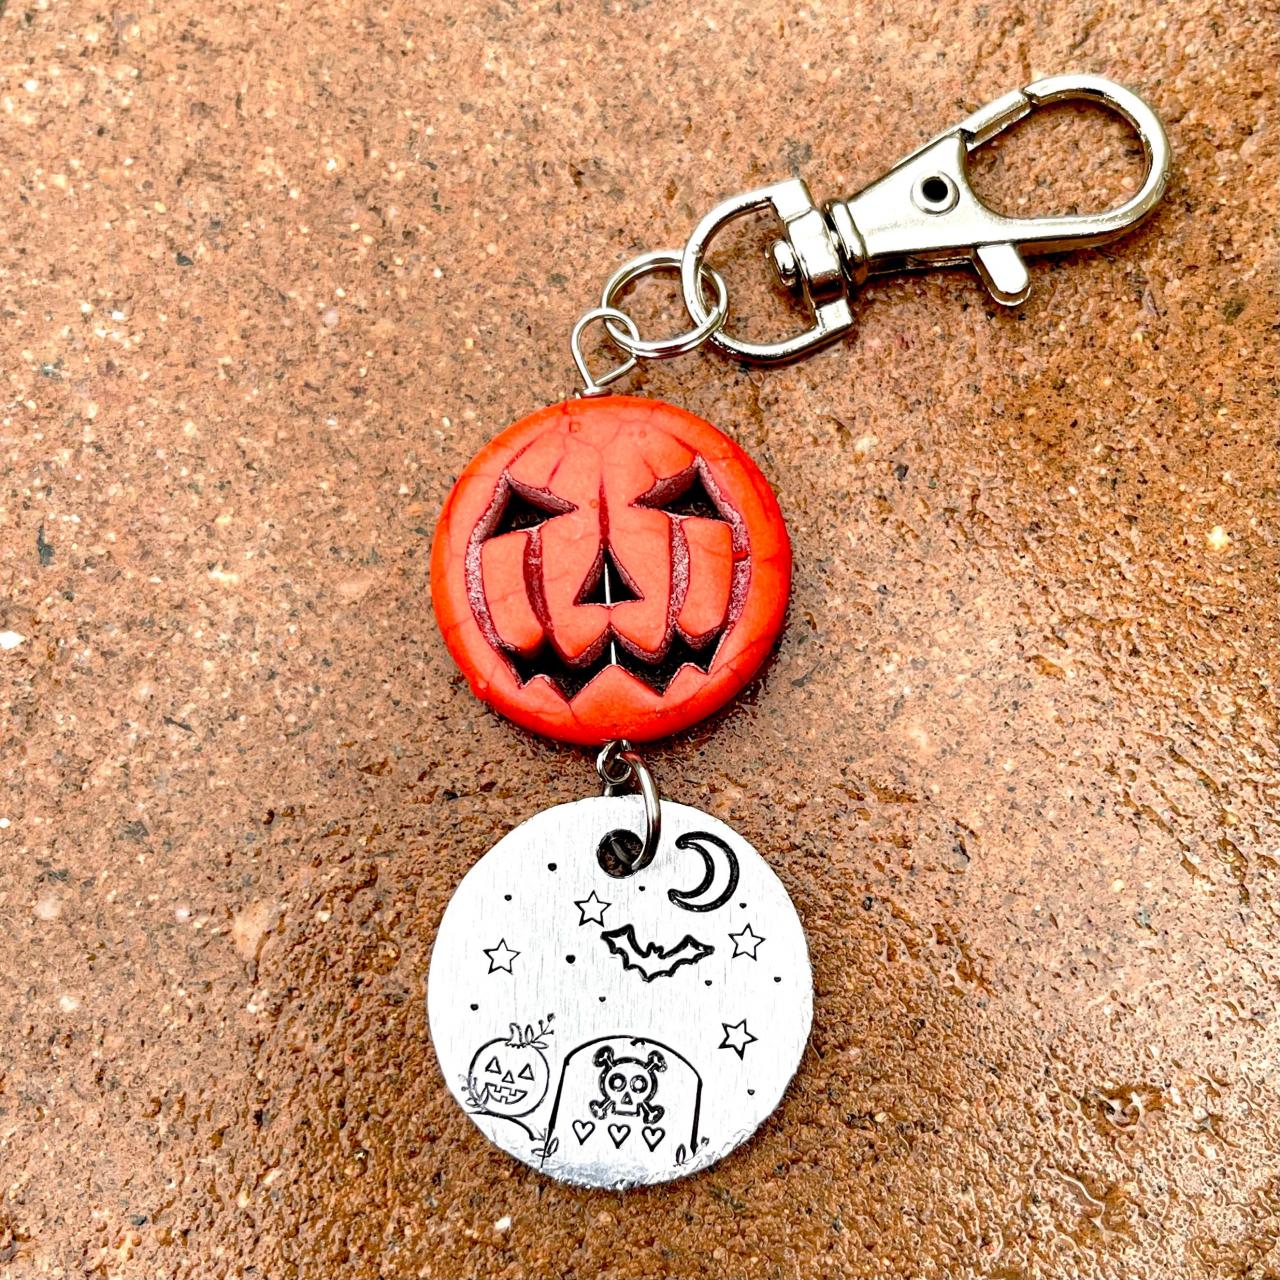 Halloween Candy Bag Charm, Halloween Keychain, Hand Stamp Metal, Metal Stamped, Spooky Keychain, Trick Or Treat, Candy Corn Charm